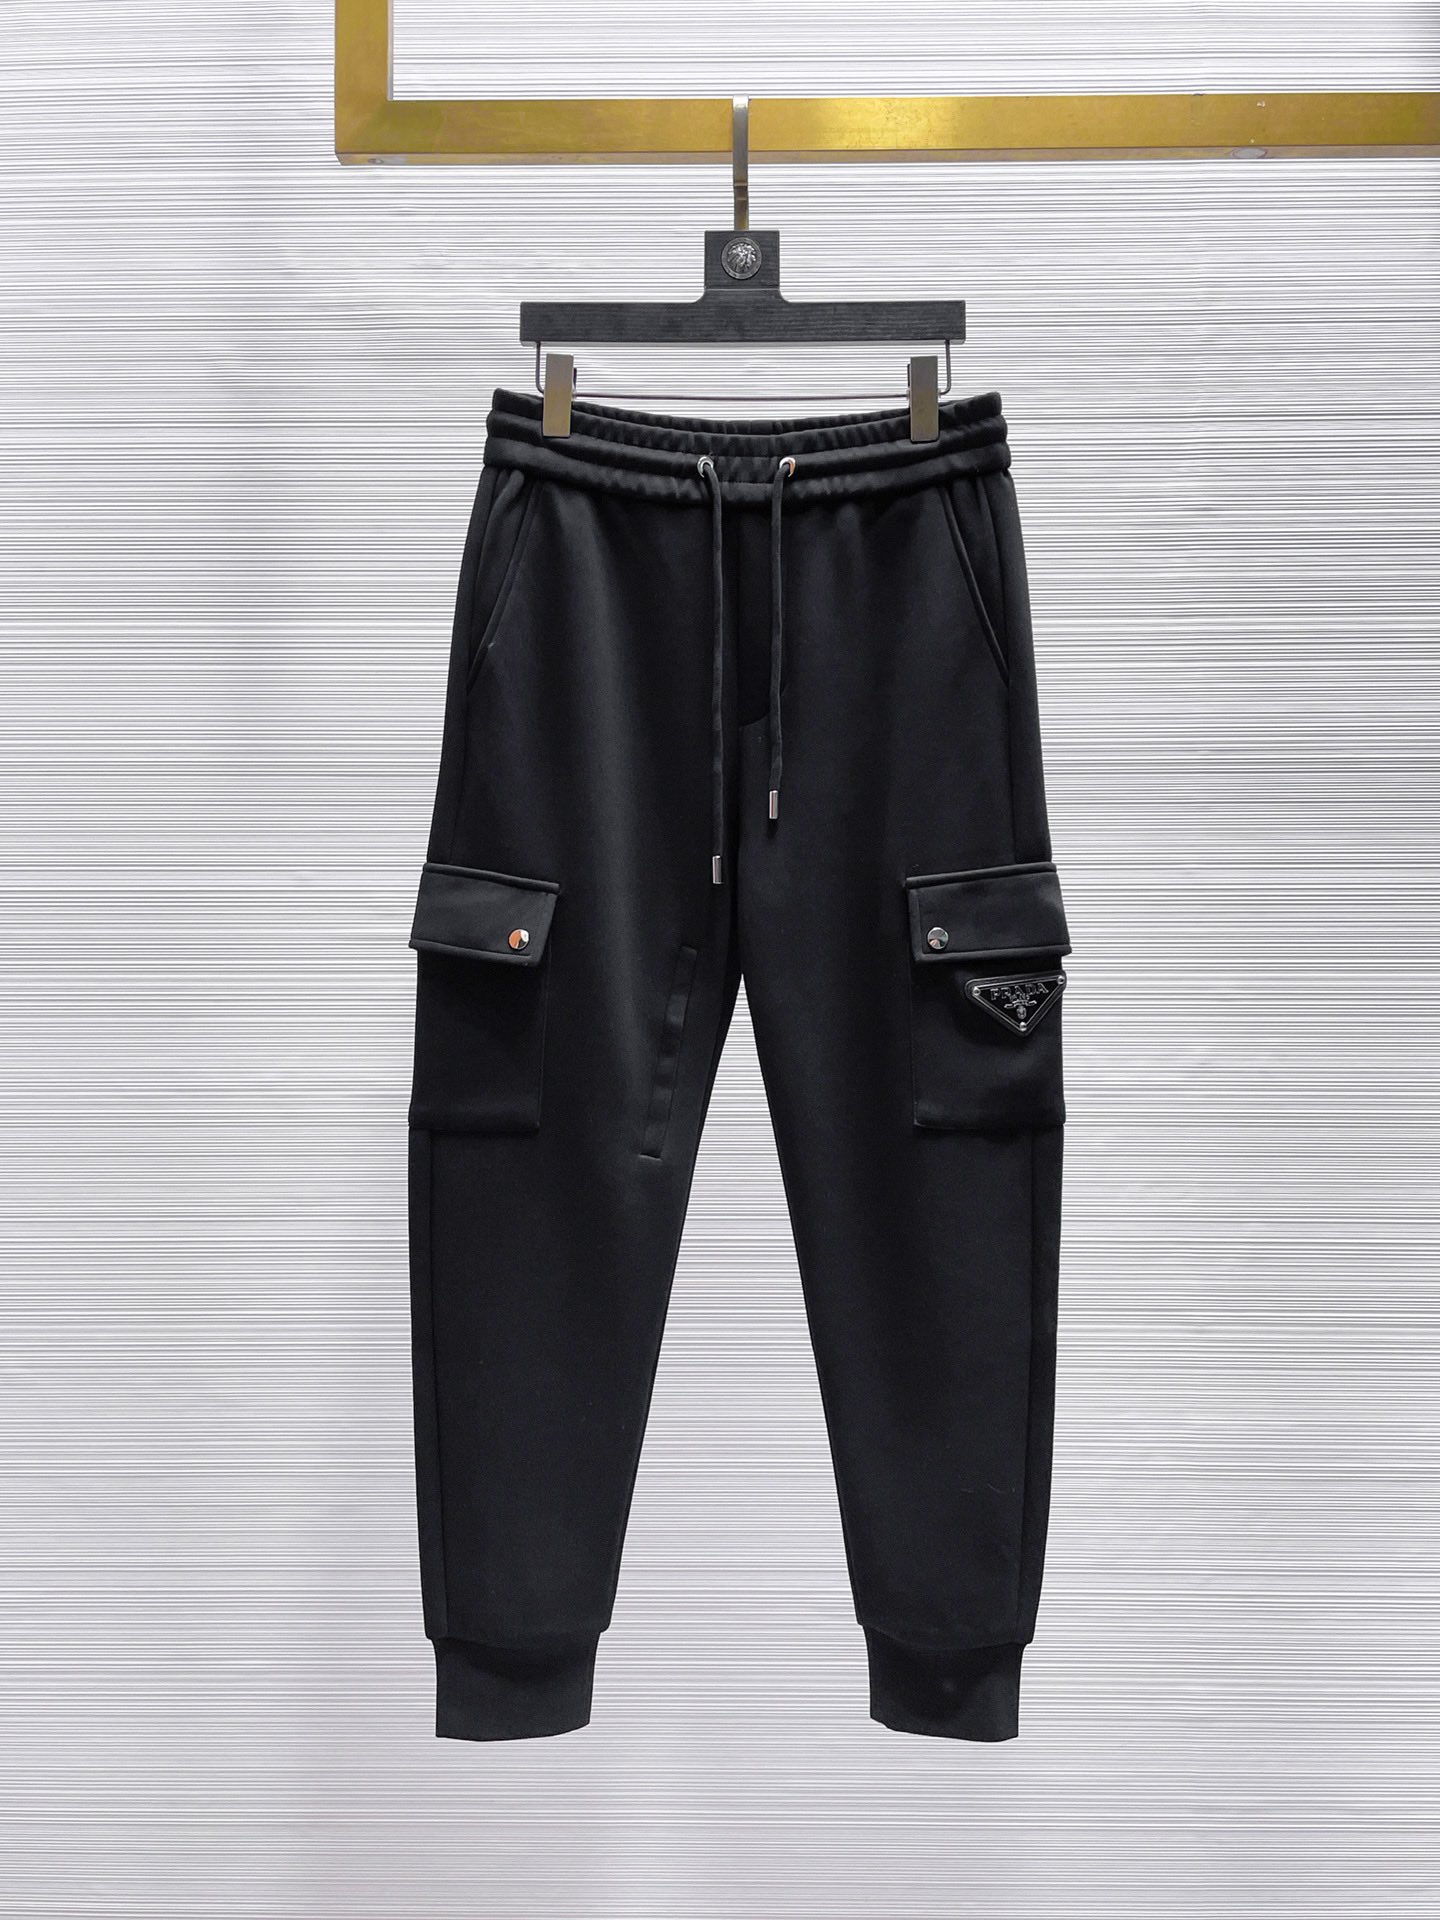 Prada Clothing Pants & Trousers Spring Collection Casual